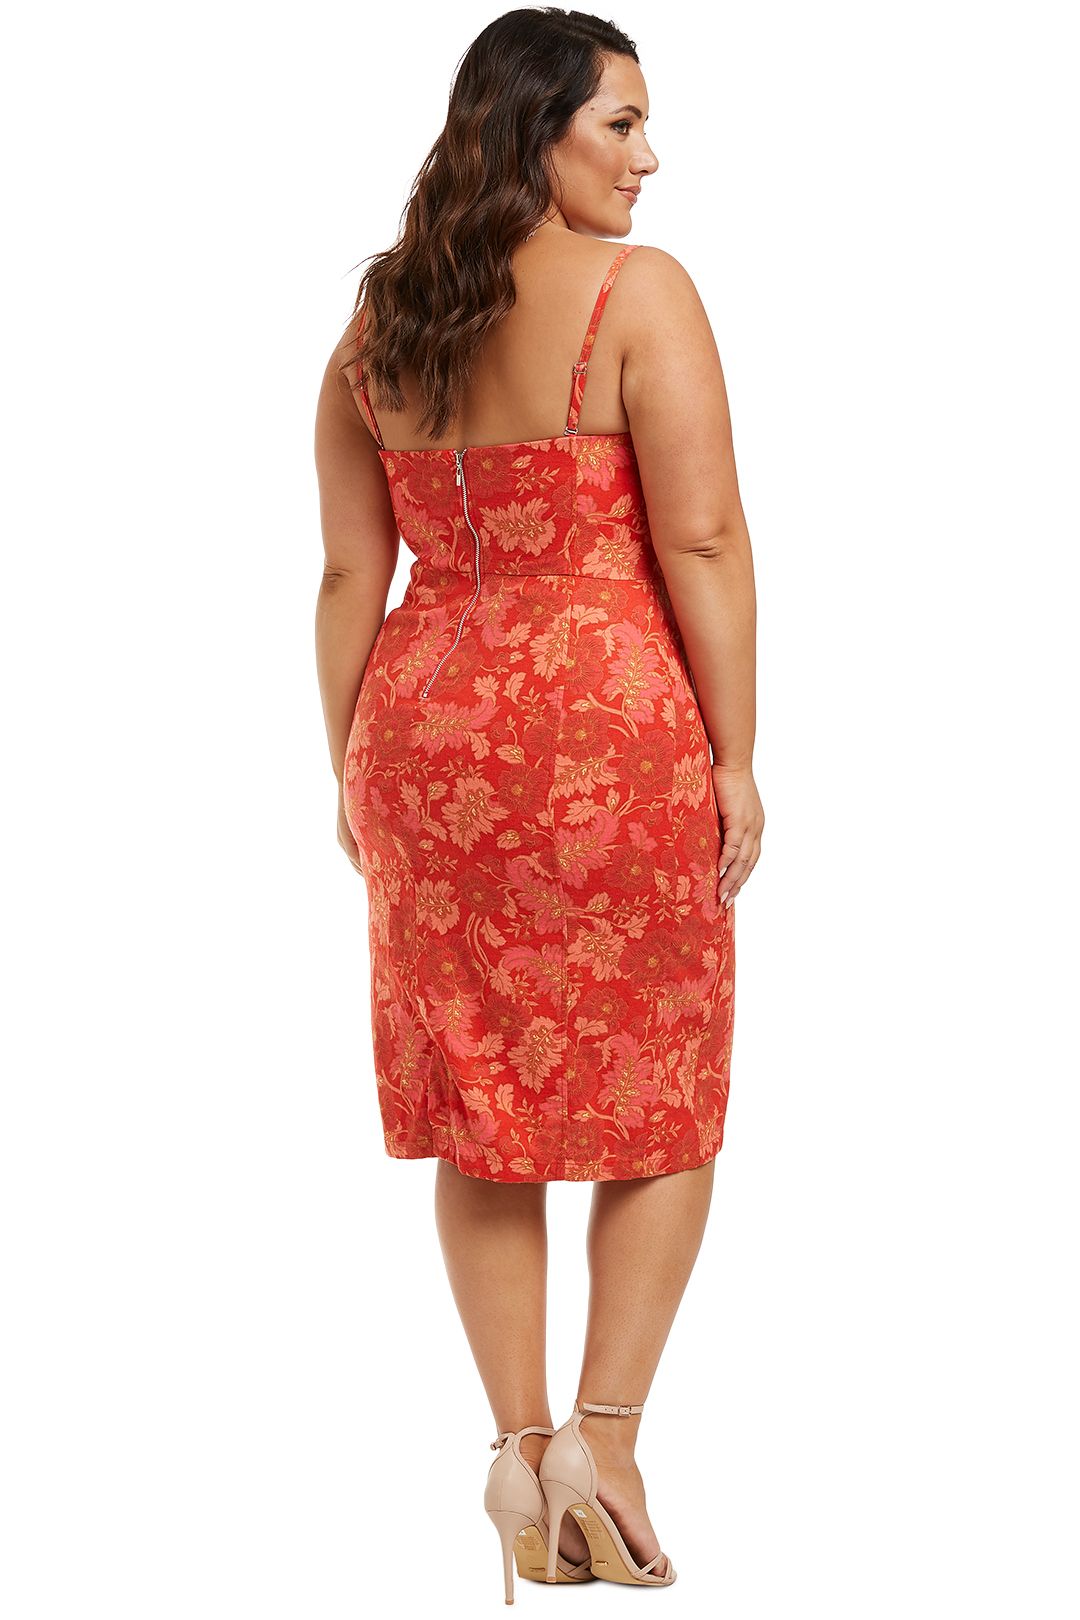 Ministry-of-Style-Hibiscus-Strapless-Dress-Print-Back